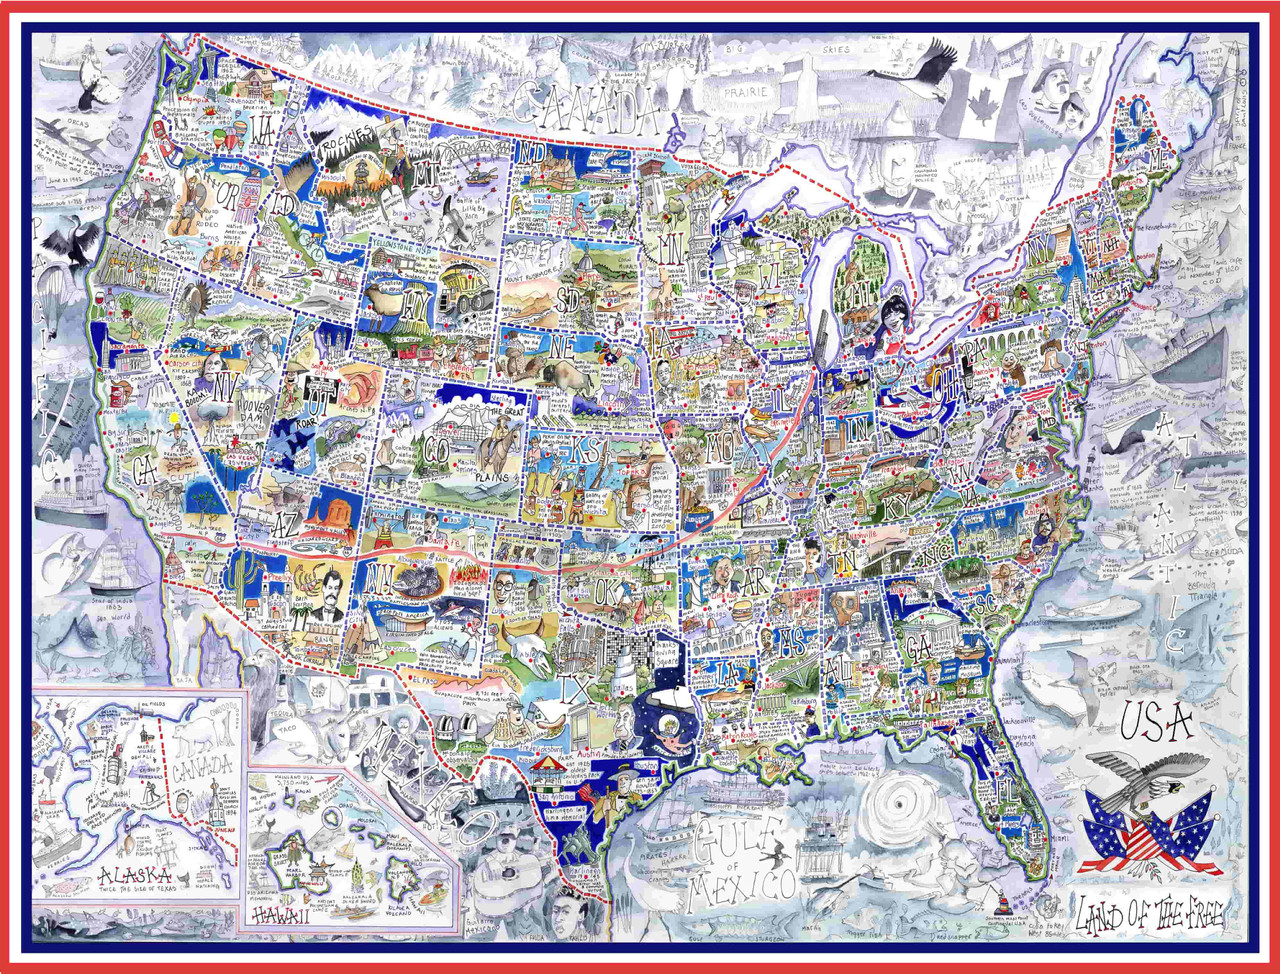 USA - Land of the Free - Illustrated Map Puzzle